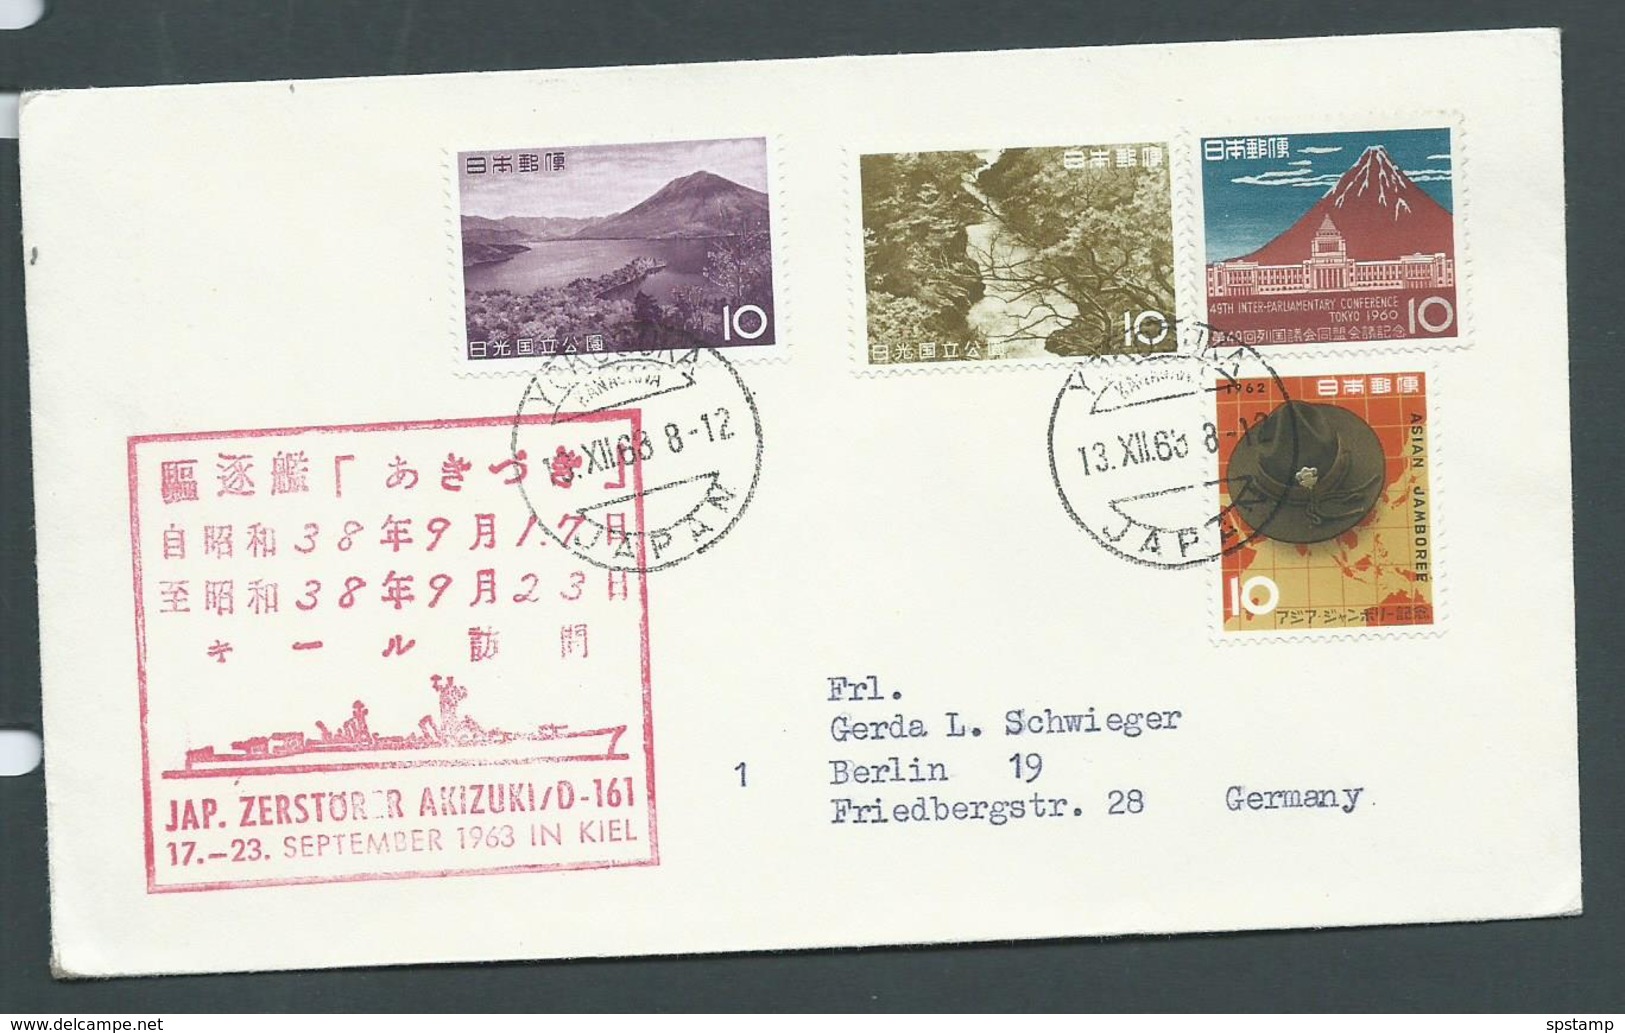 Japan 1963 Paquebot Cover To Germany Ship Zerstor Akizuki - Covers & Documents